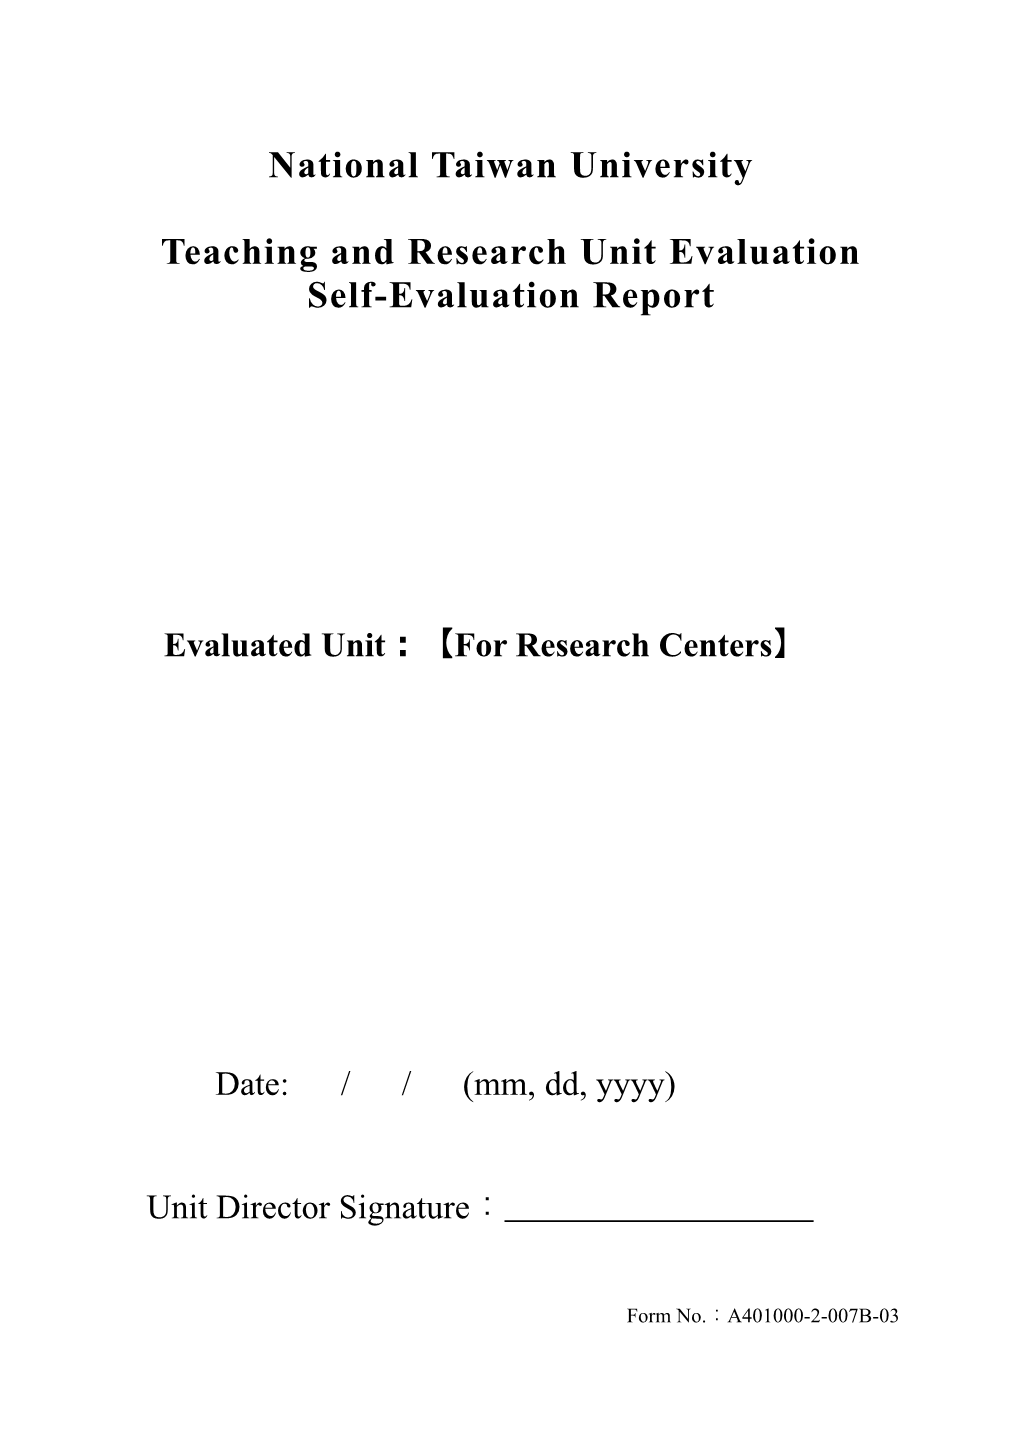 Teaching and Research Unit Evaluation